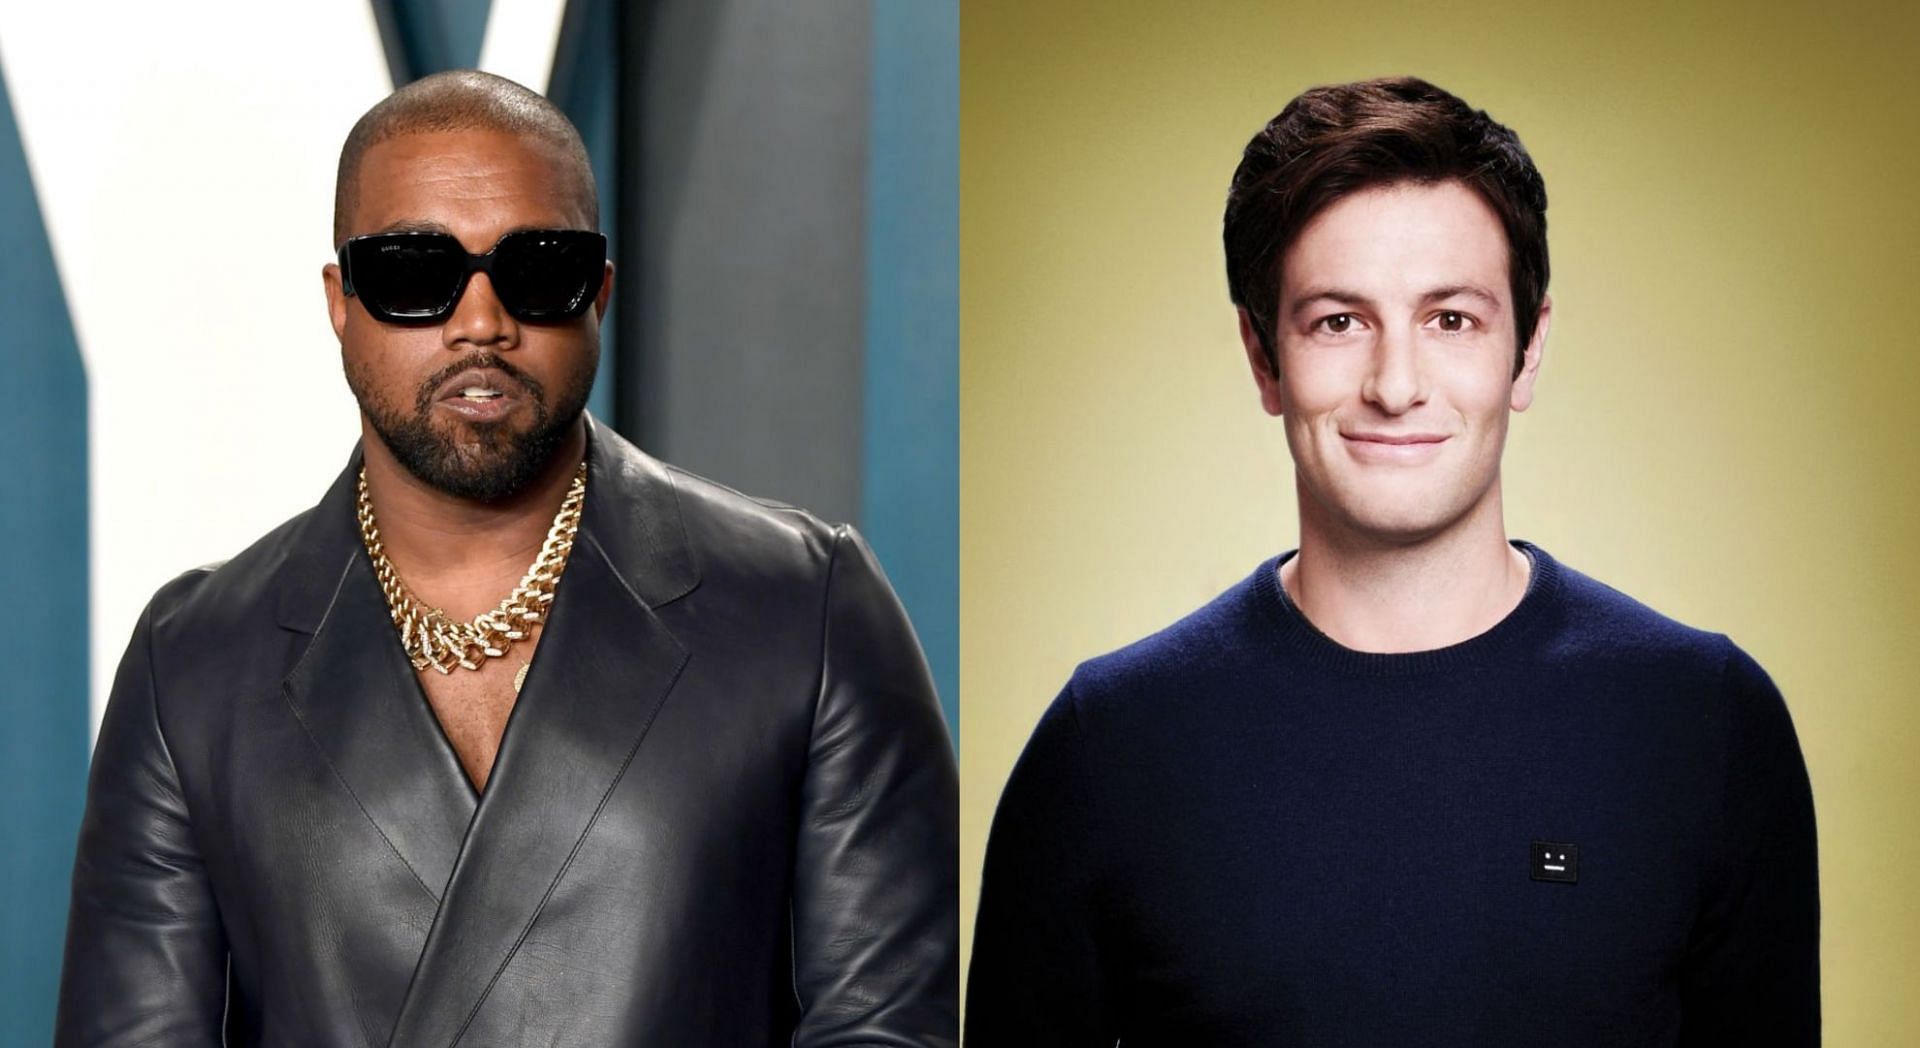 Kanye West took a jibe at Josh Kushner over SKIMS investment (Image via Karwai Tang/Getty Images and Jamel Toppin/Getty Images)